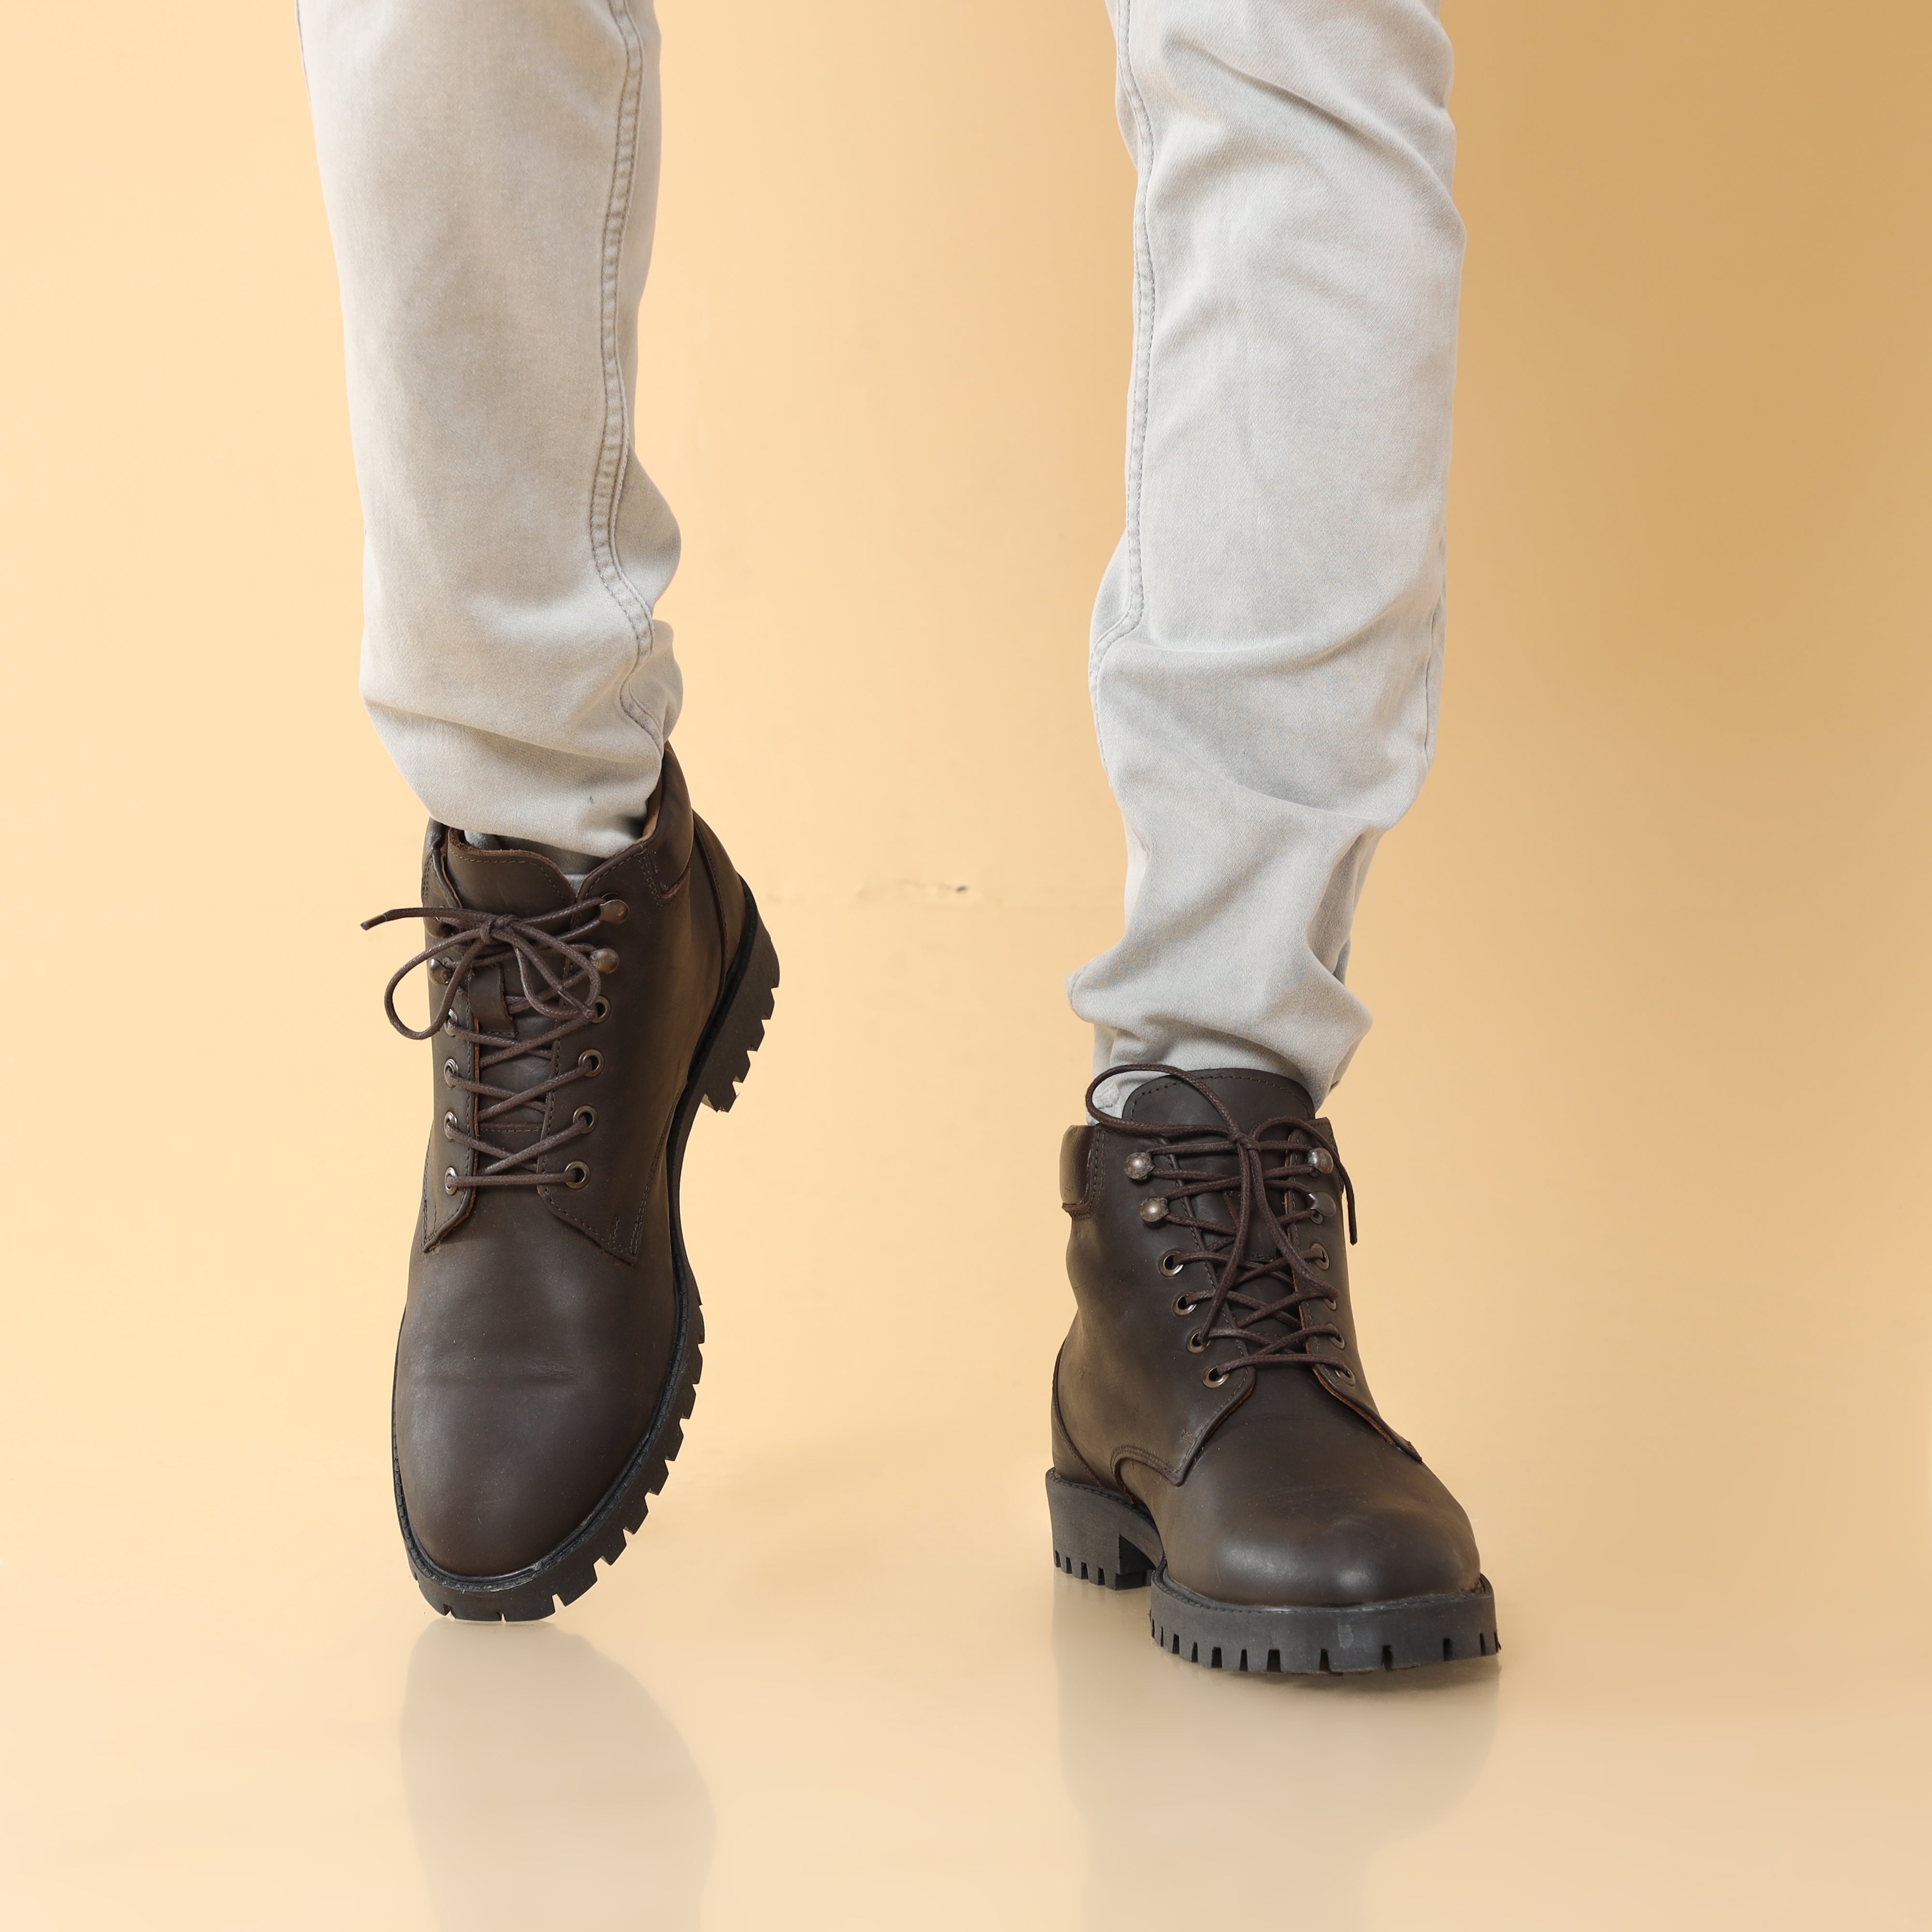 RIDING BOOT OIL PULL UP CHOCOLATE BROWN